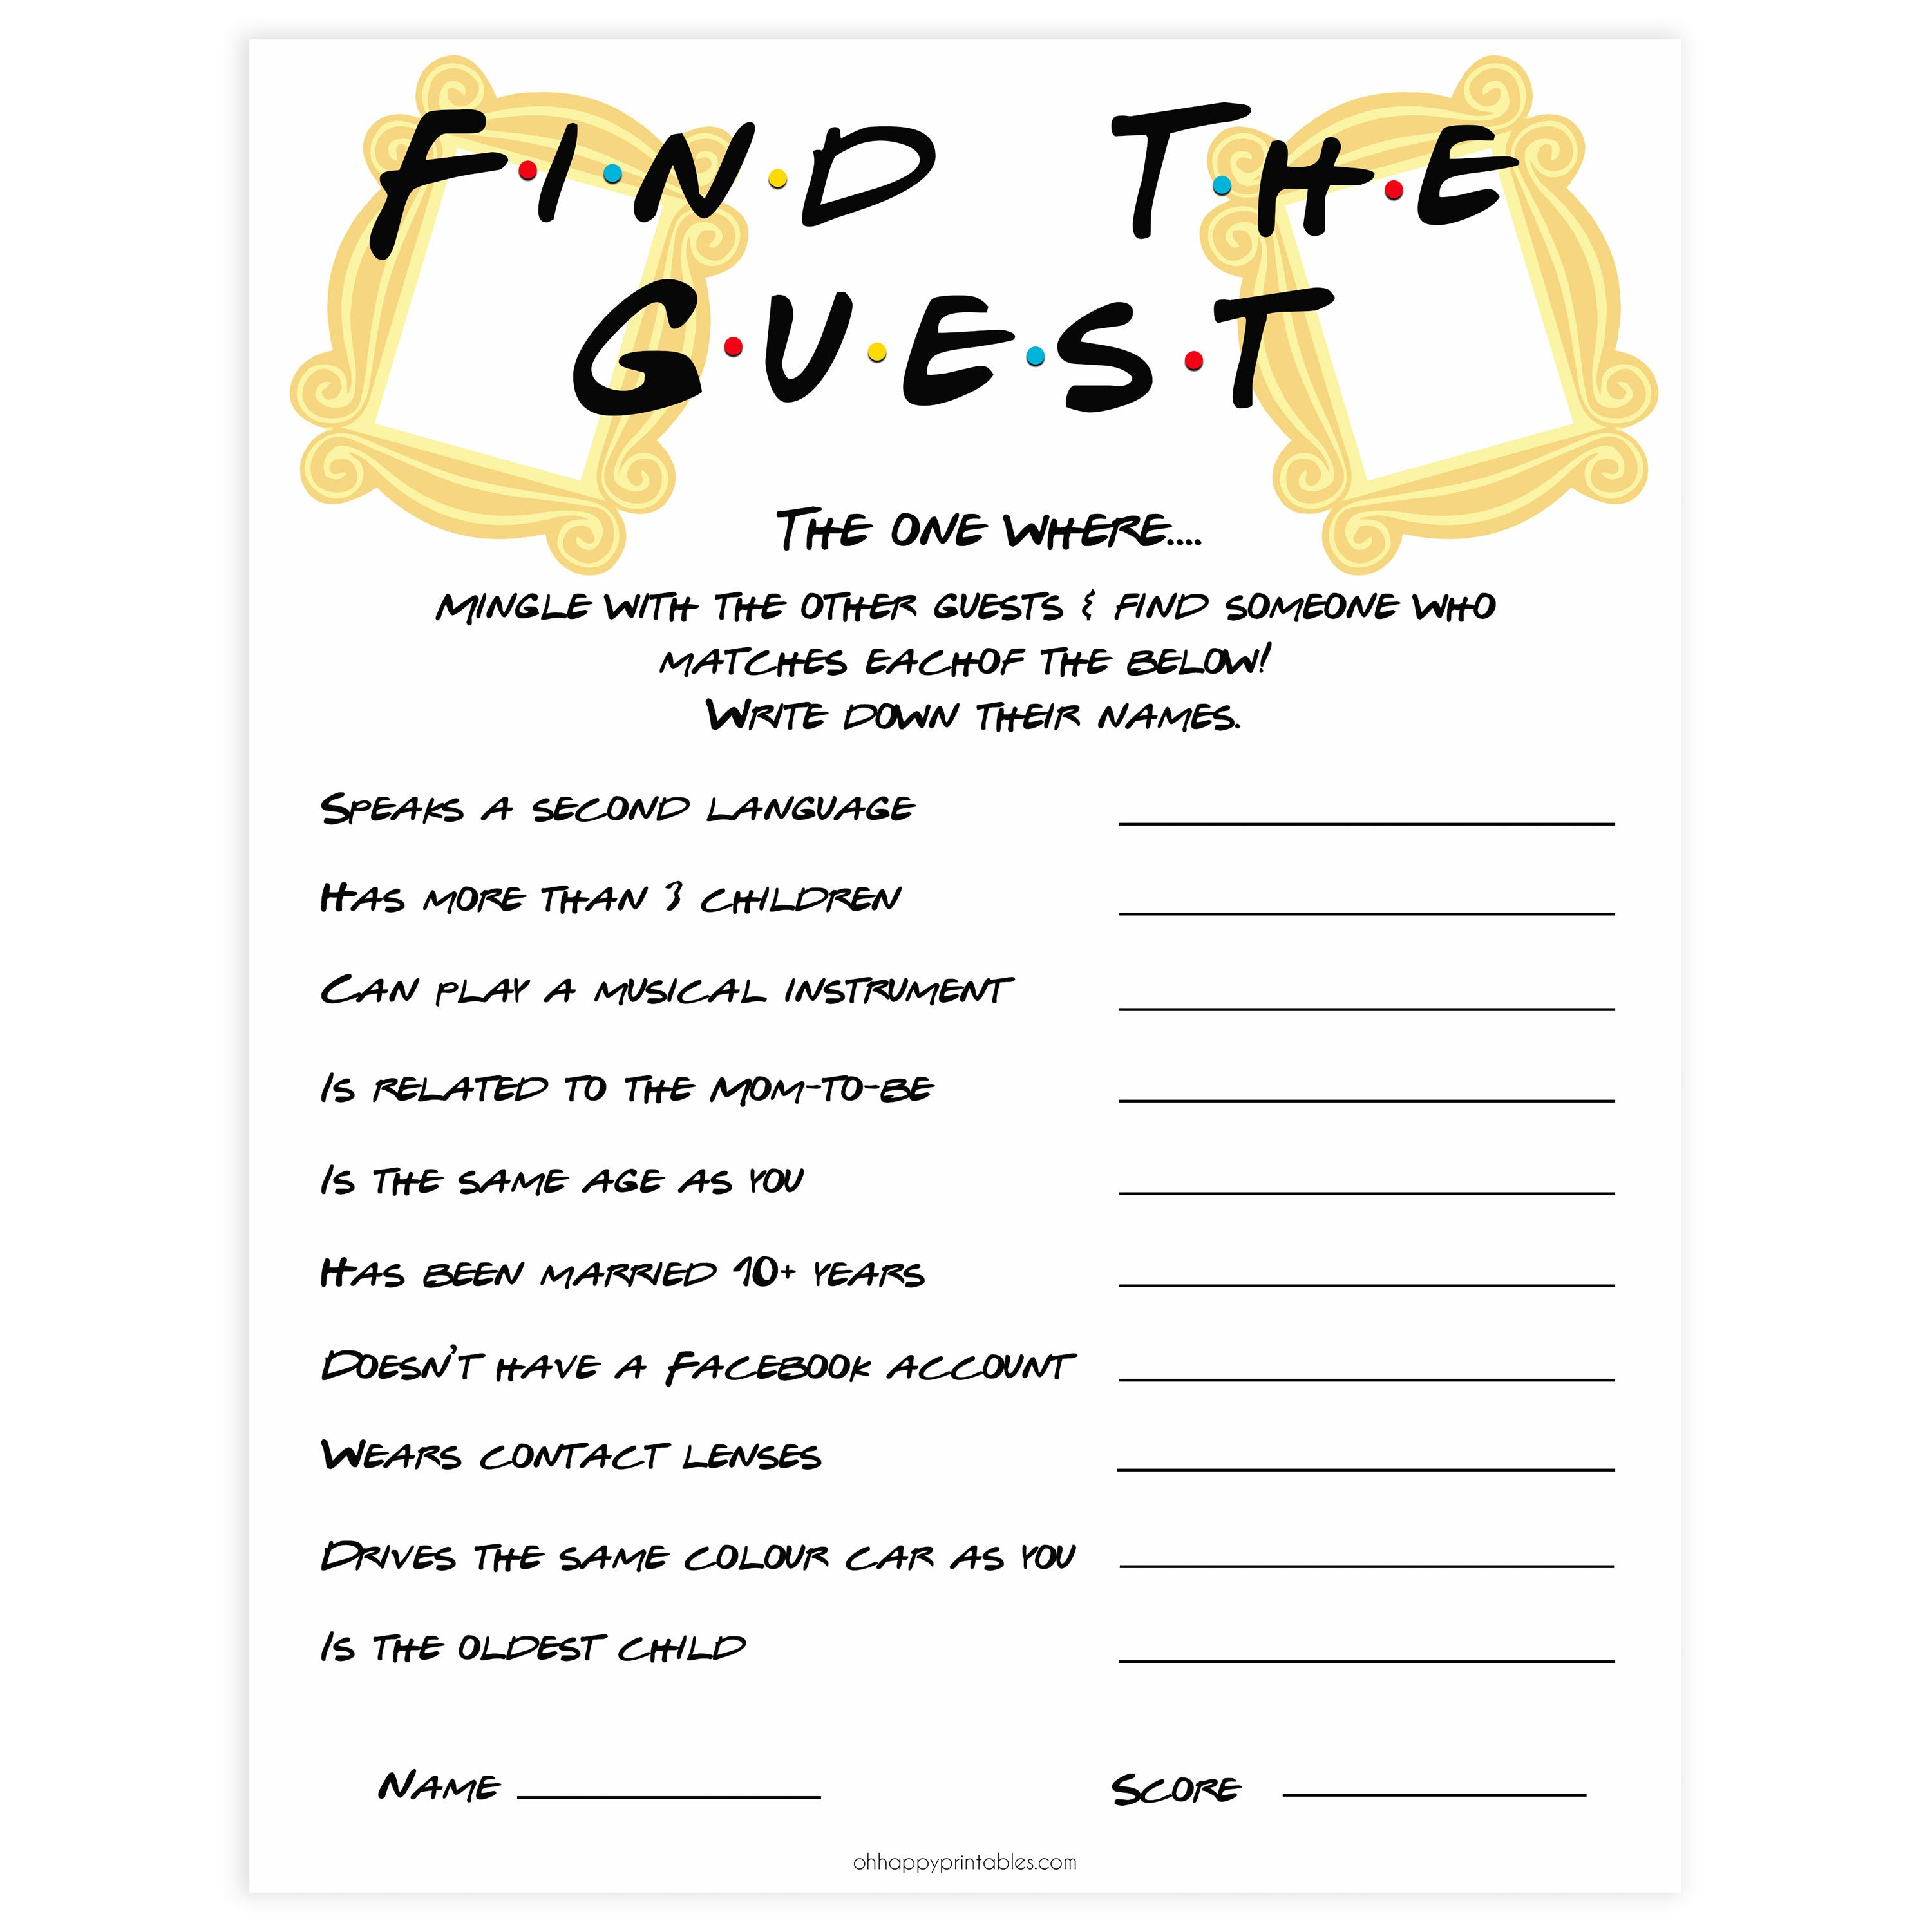 baby find the guest, Printable baby shower games, friends fun baby games, baby shower games, fun baby shower ideas, top baby shower ideas, friends baby shower, friends baby shower ideas